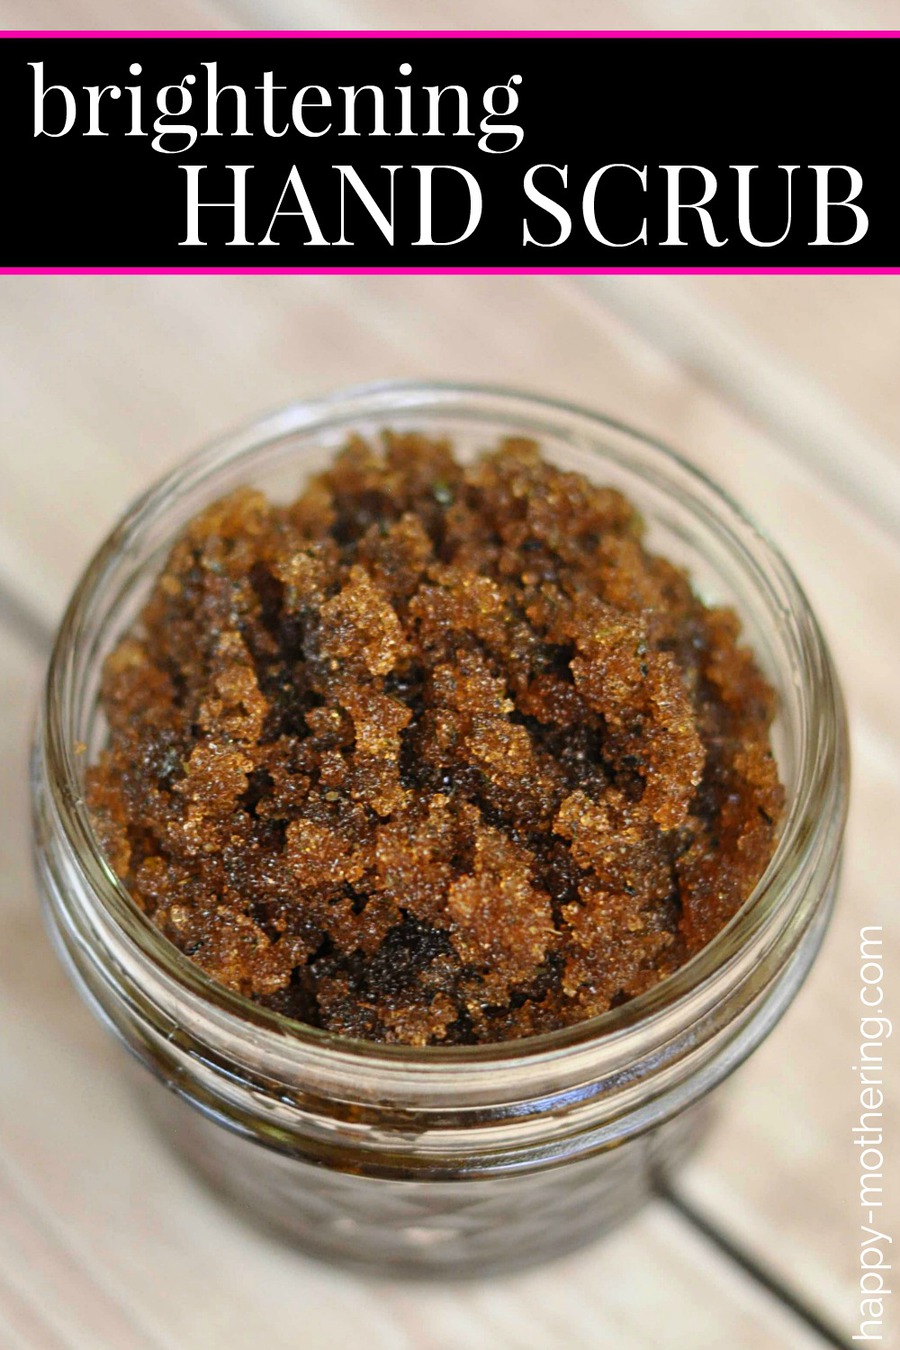 Dry skin plagues many people, especially during dry winter months. This DIY brightening hand scrub exfoliates and nourishes skin so it can retain moisture better.